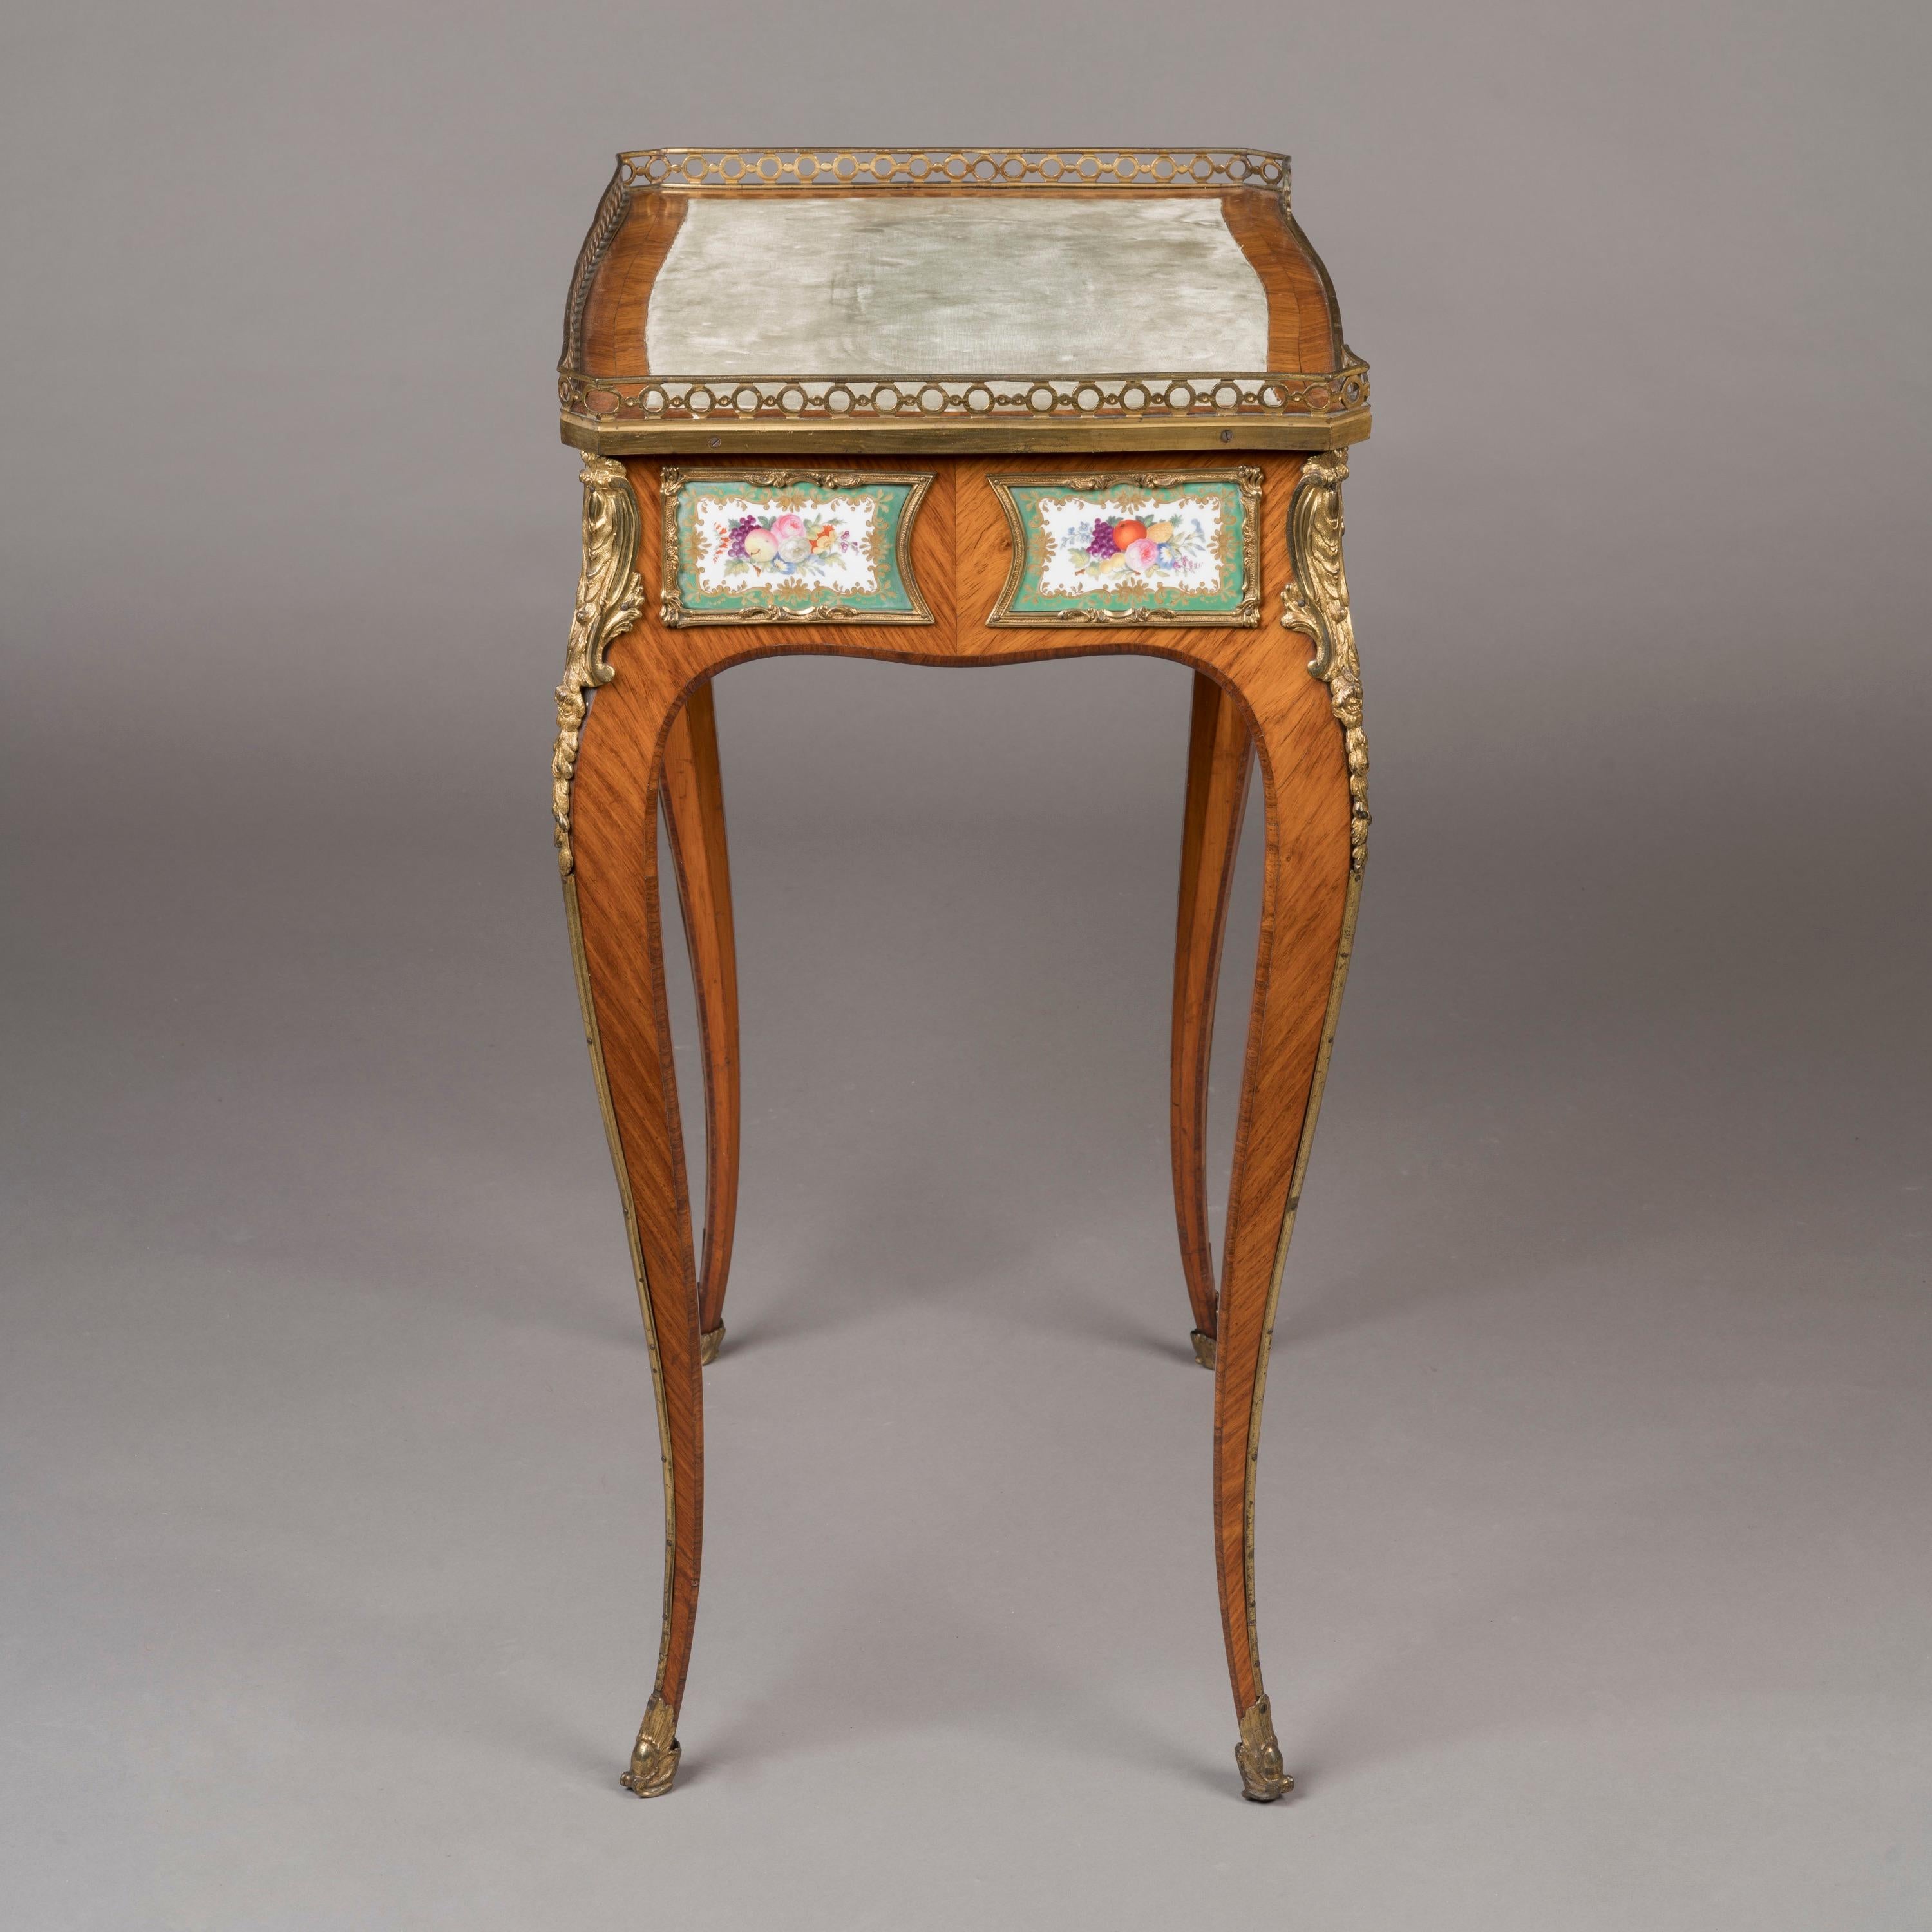 English 19th Century French Porcelain-Mounted Occasional Table in the Louis XV/XVI Style For Sale